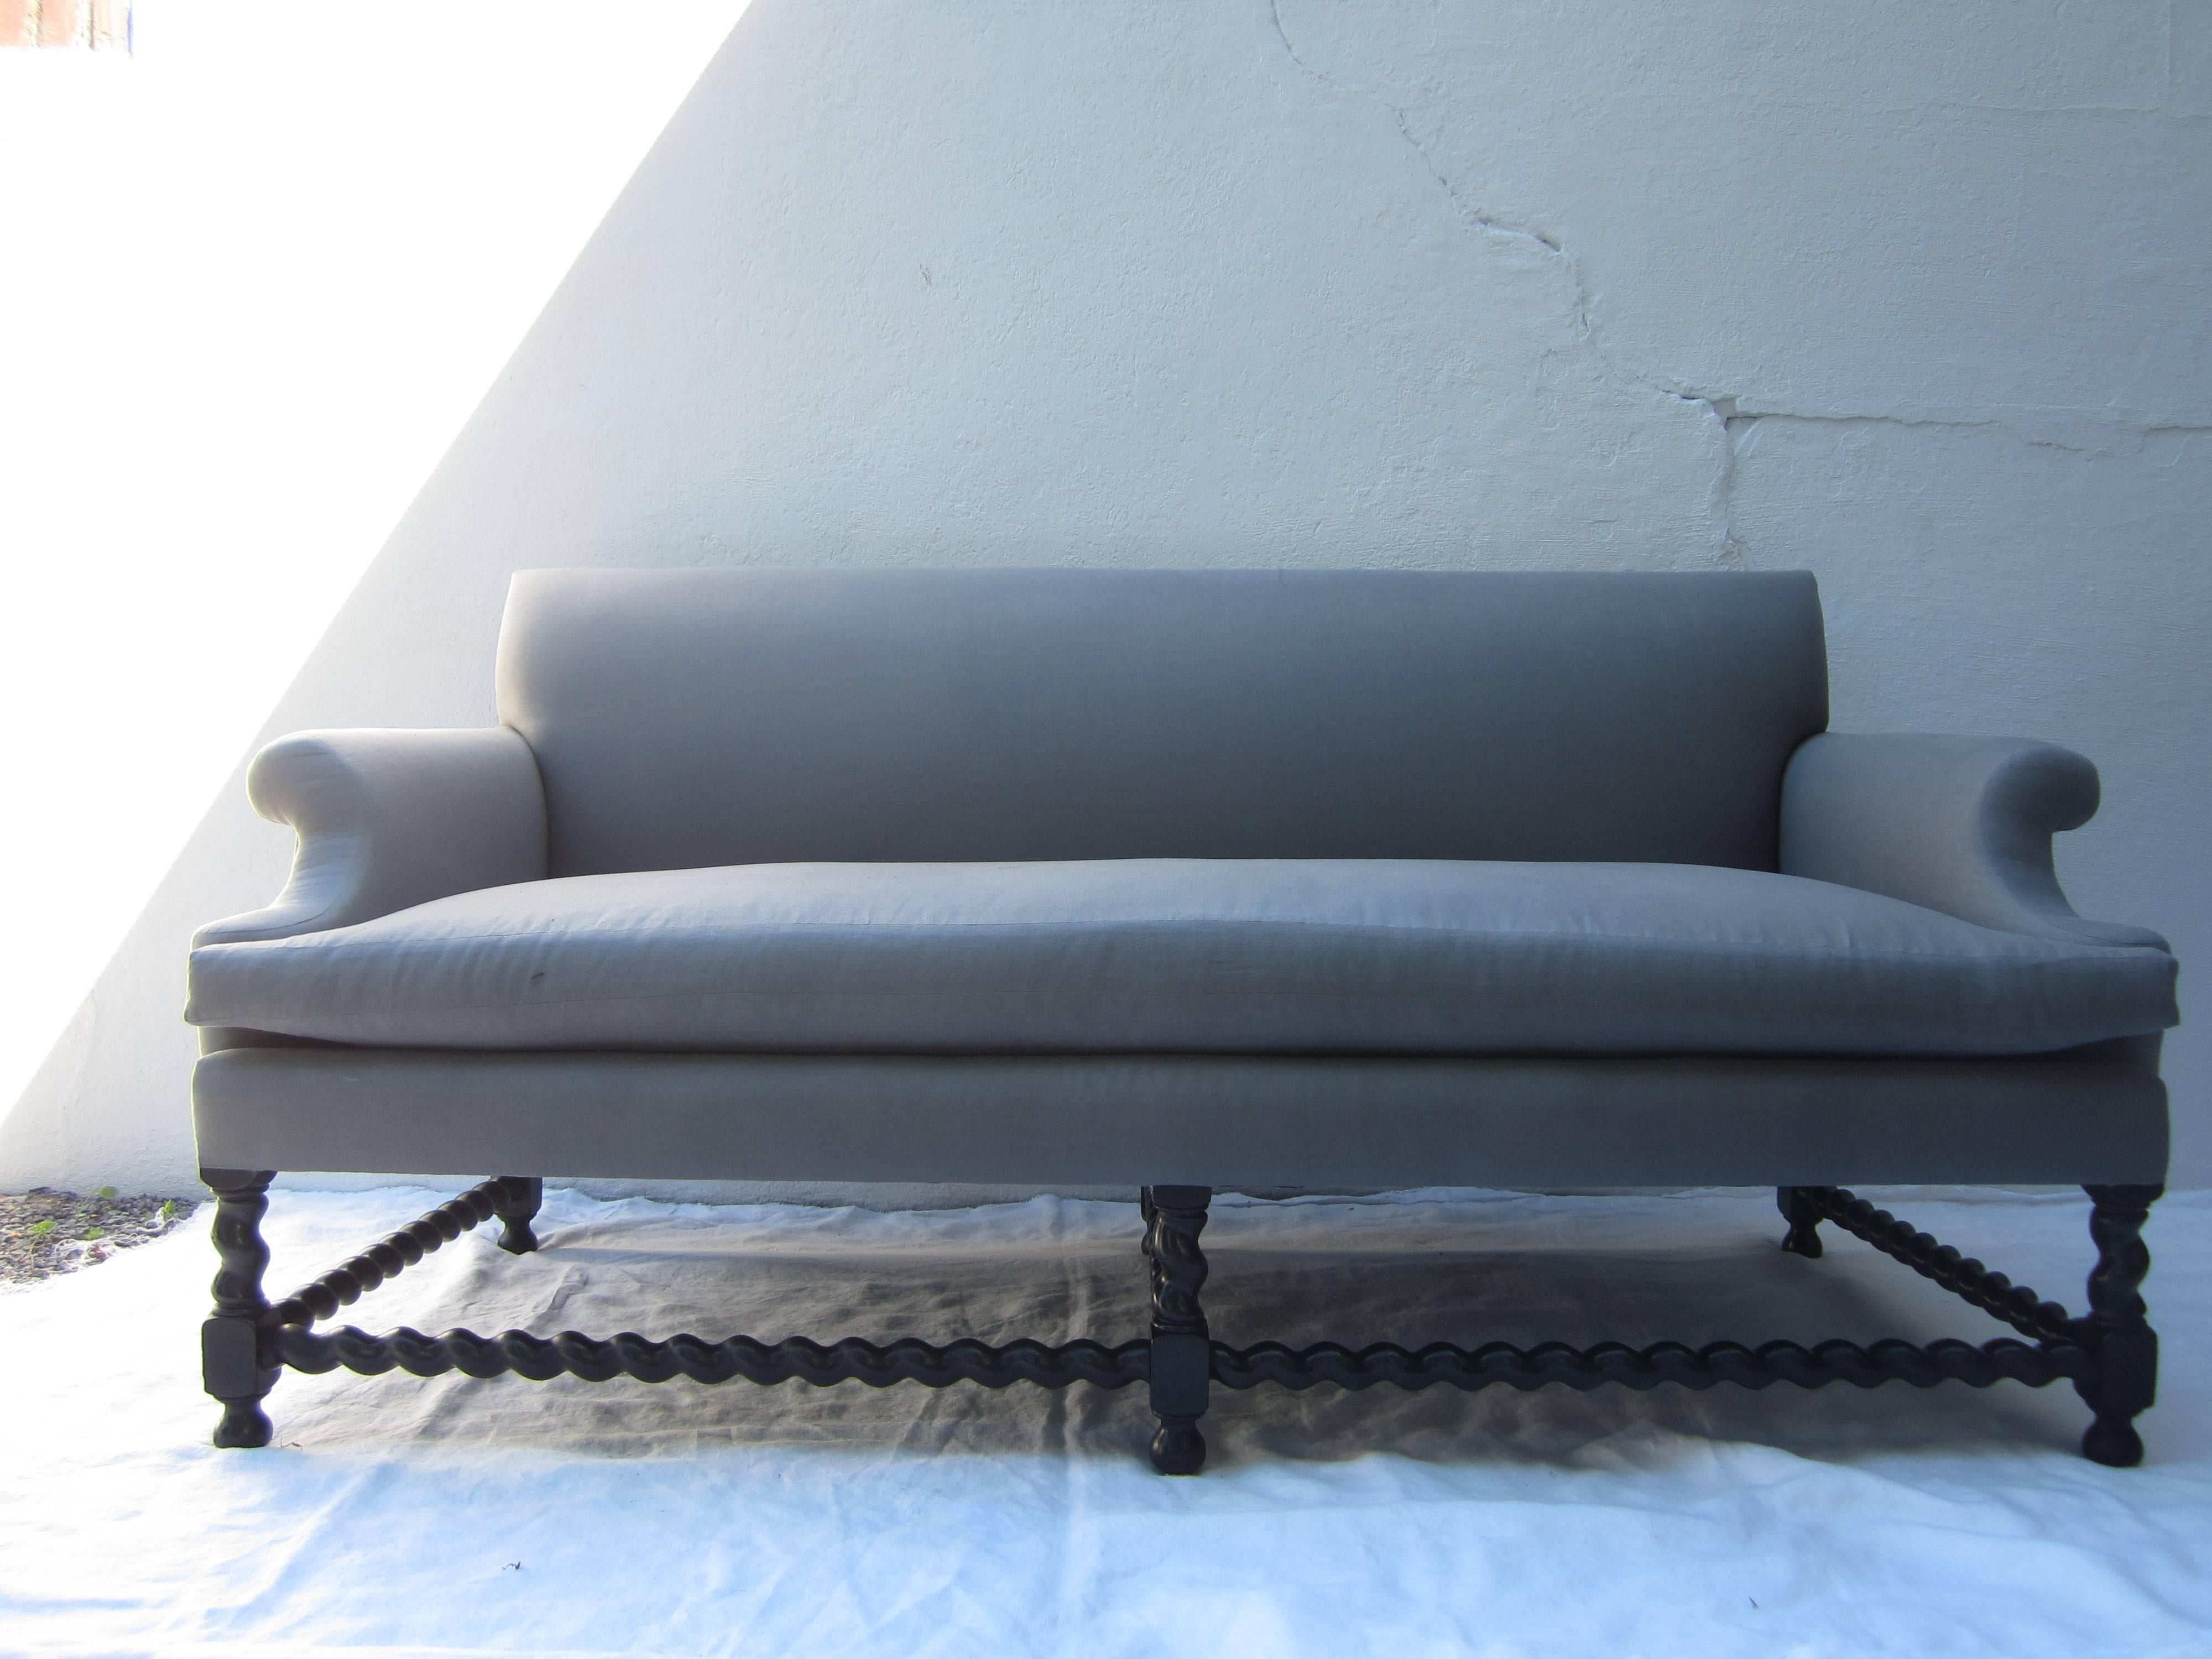 Newly refurbished twisted barley base settee with single cushion, upholstered in a fine gray linen.